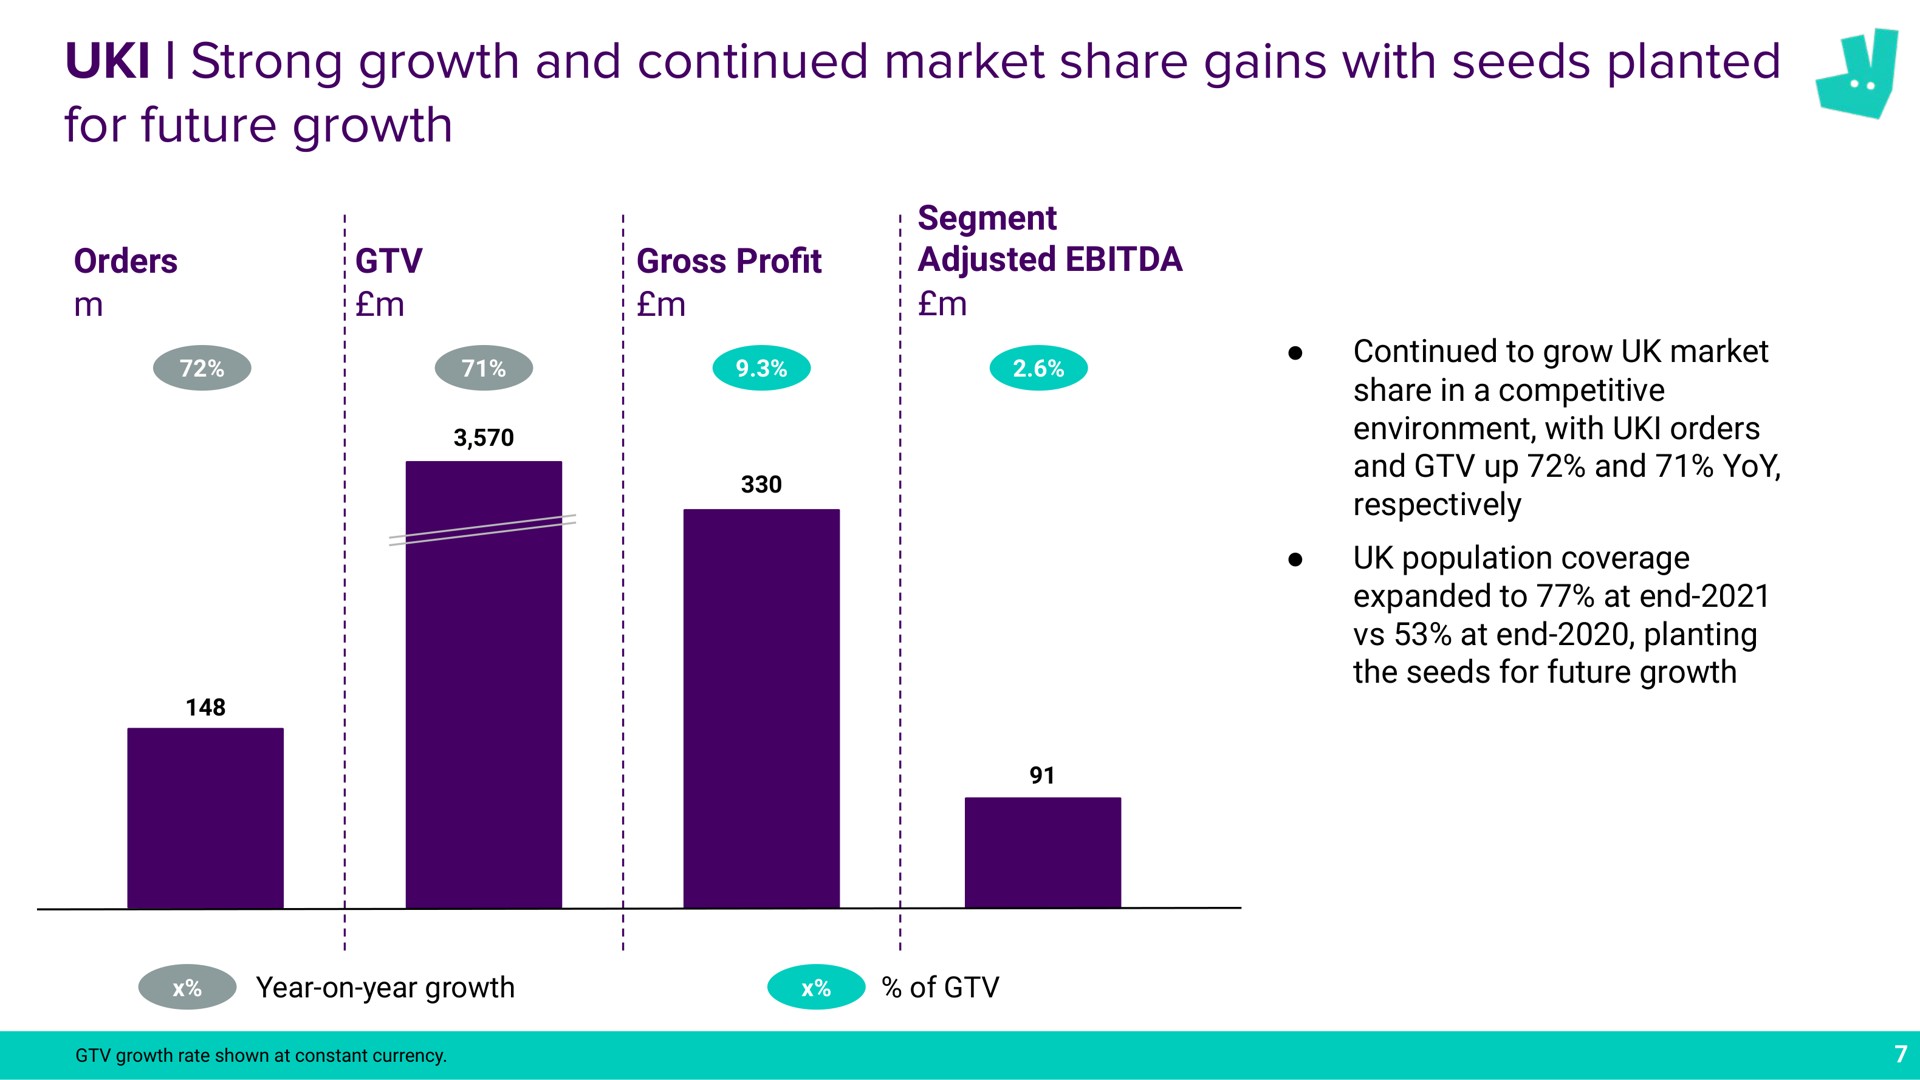 strong growth and continued market share gains with seeds planted for future growth | Deliveroo